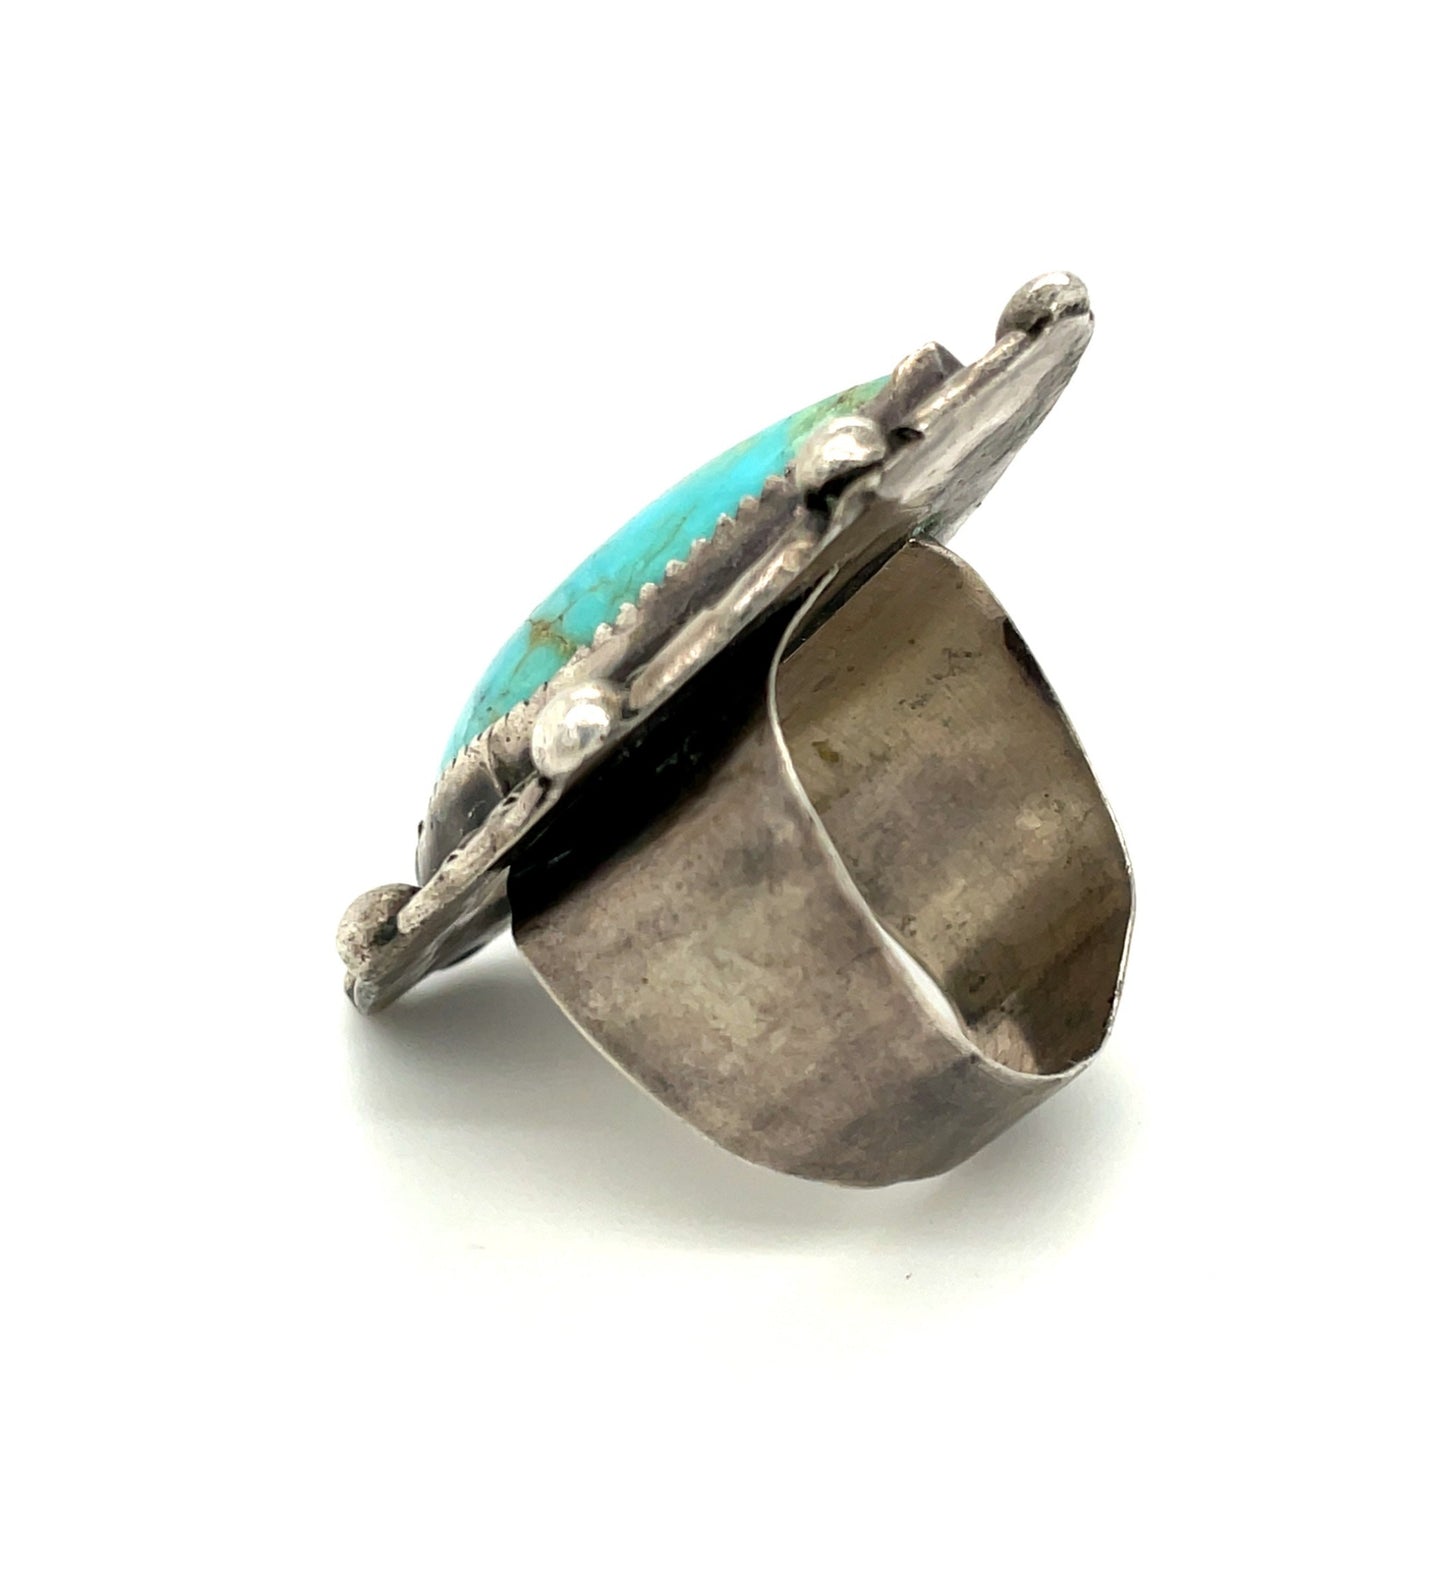 Vintage Southwestern Sterling Silver and Turquoise Ring Size 13